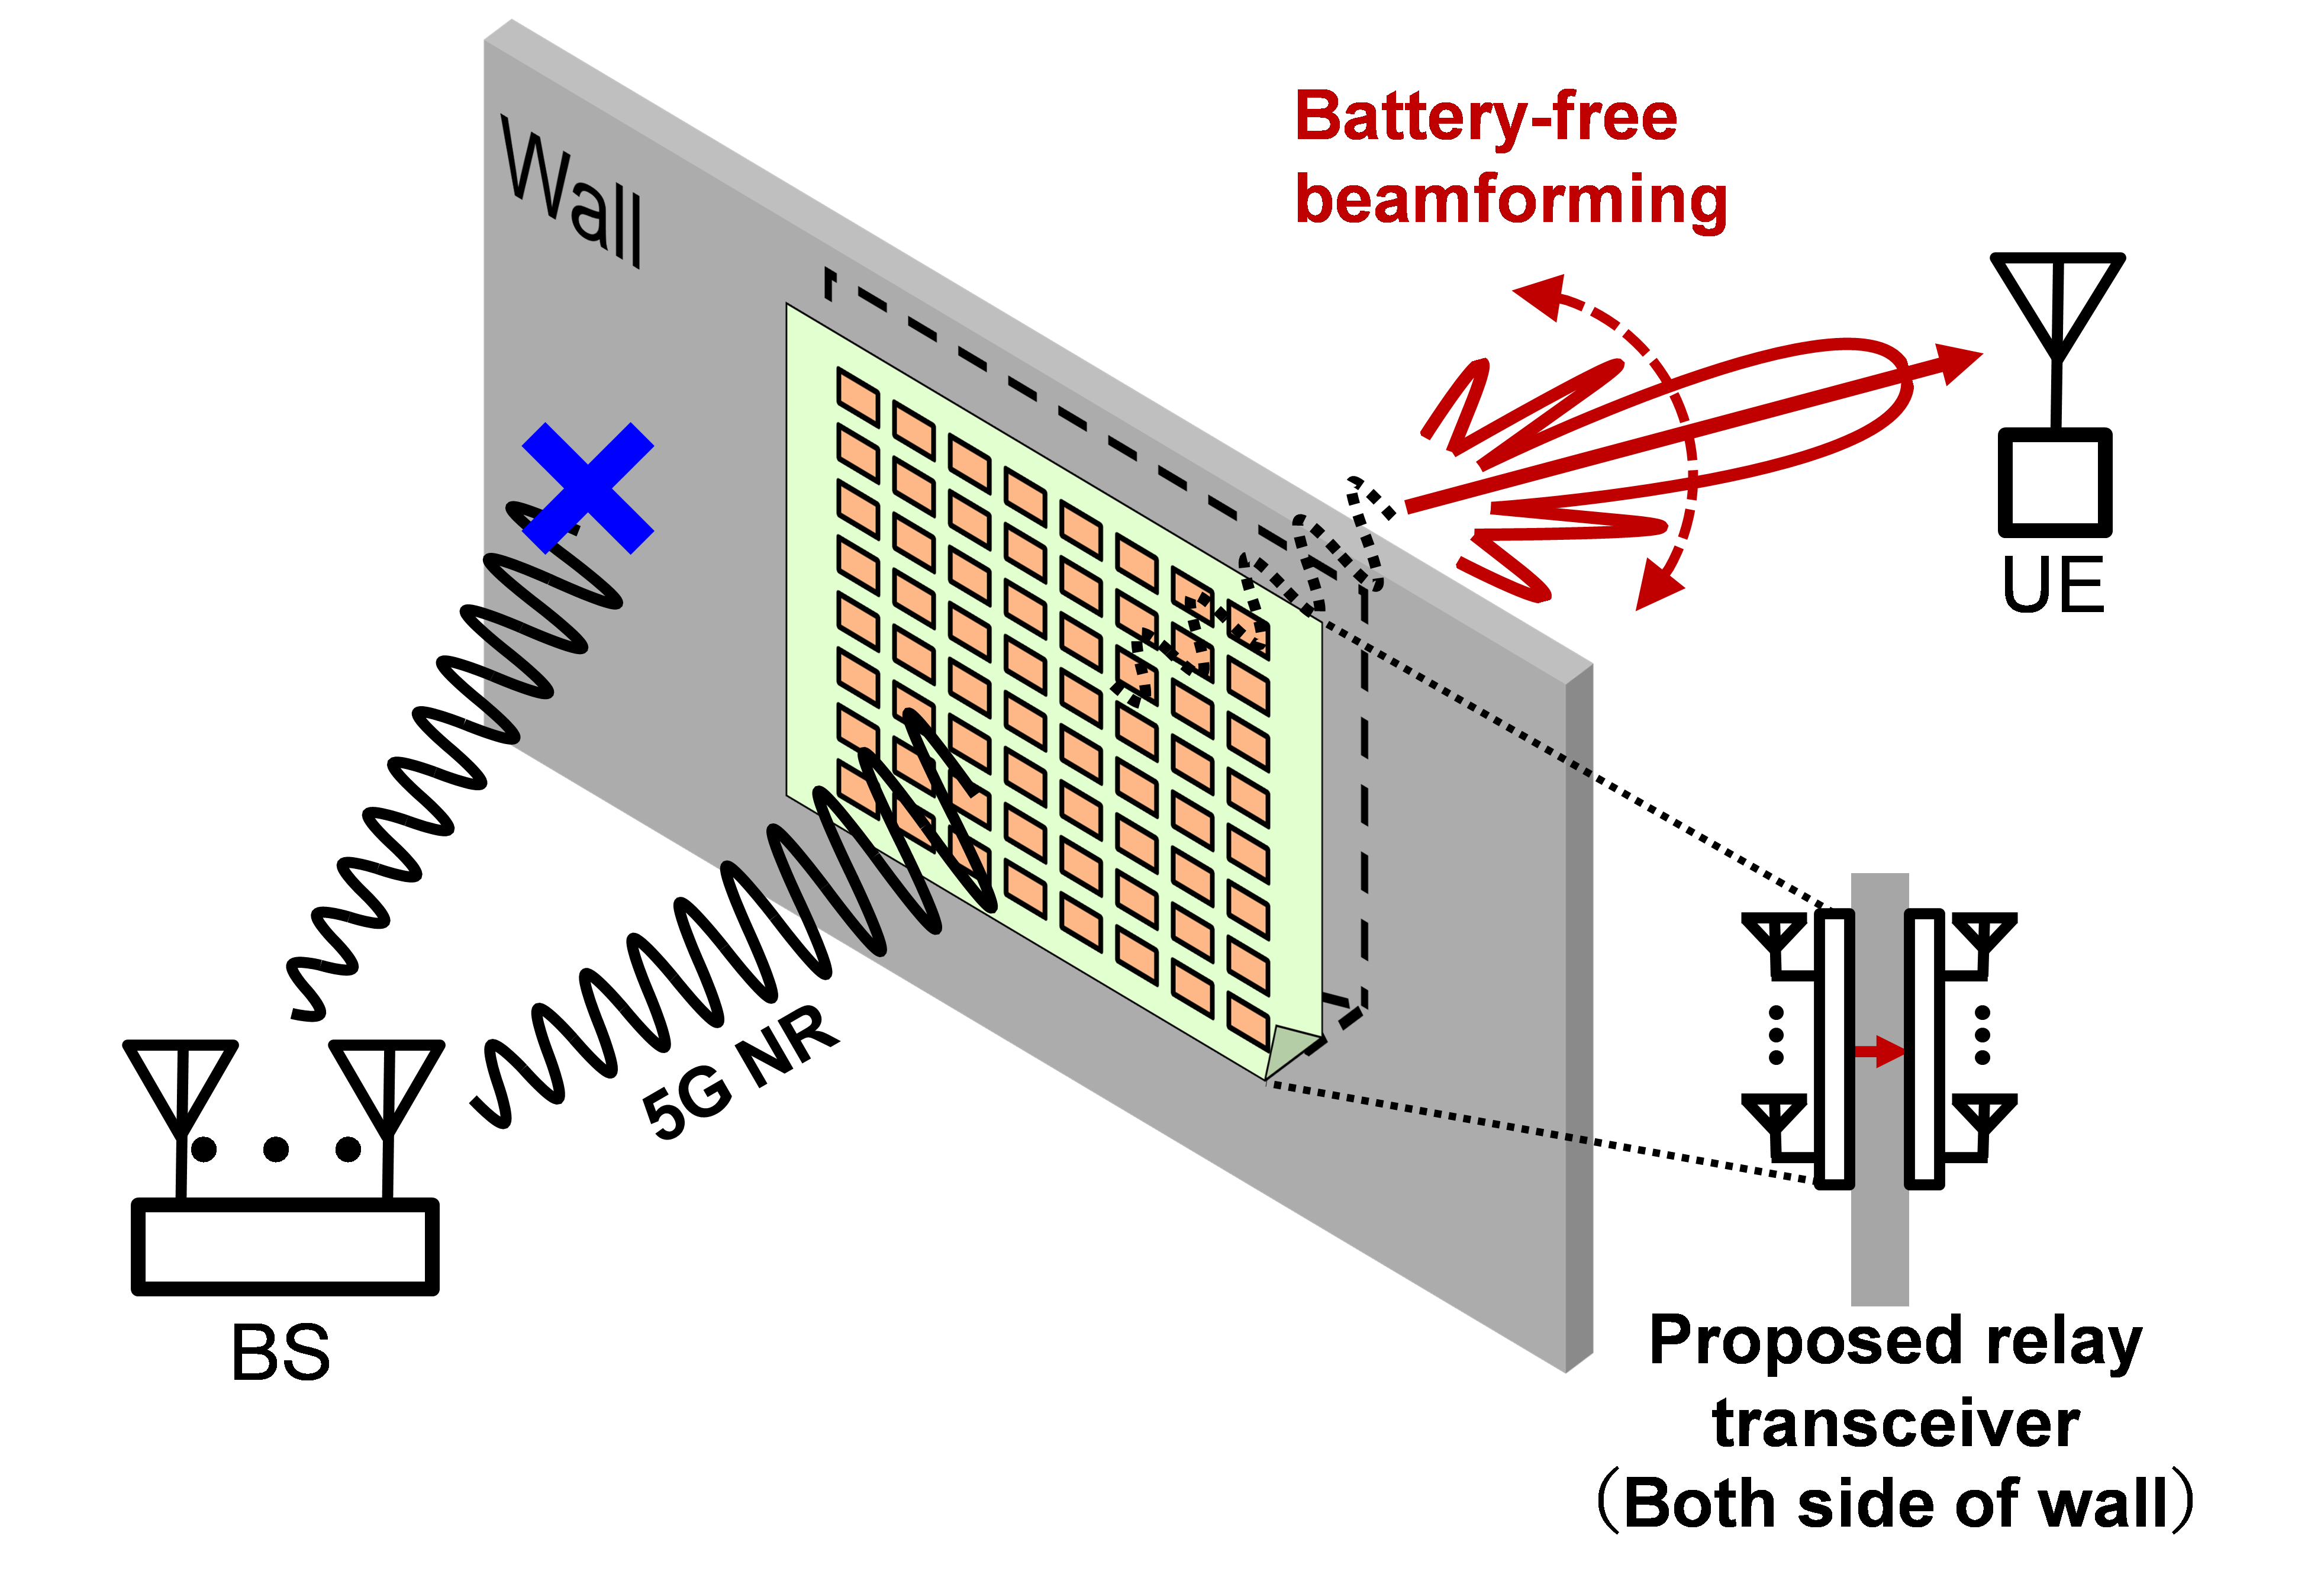 Concept of battery-free millimeter-wave 5G relay  transceiver using wireless power transfer